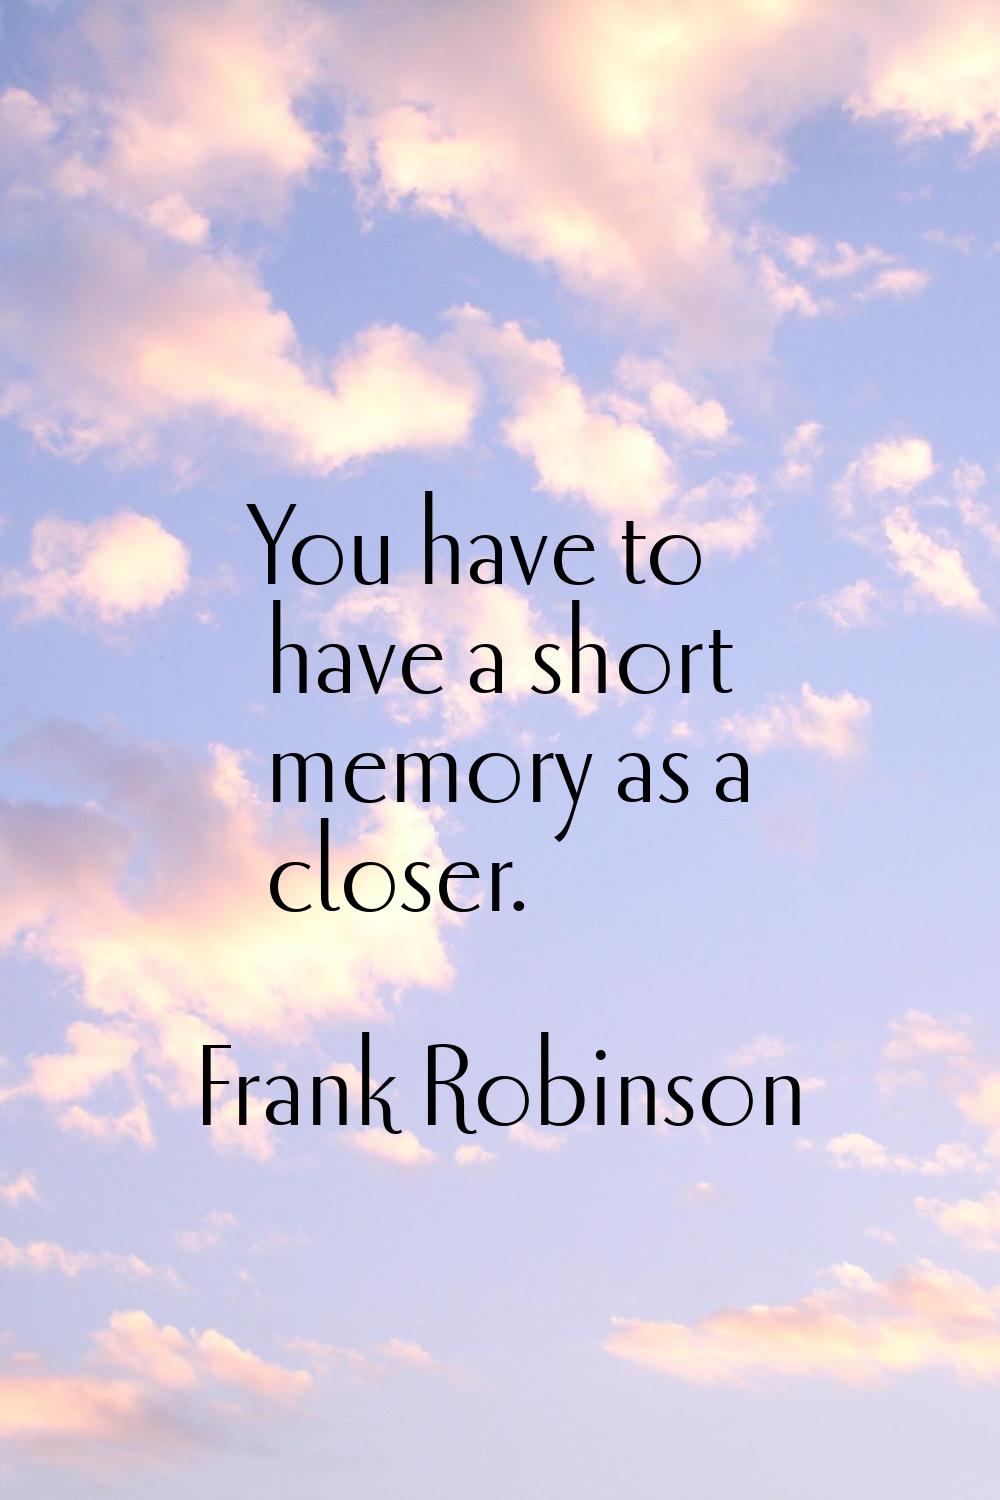 You have to have a short memory as a closer.